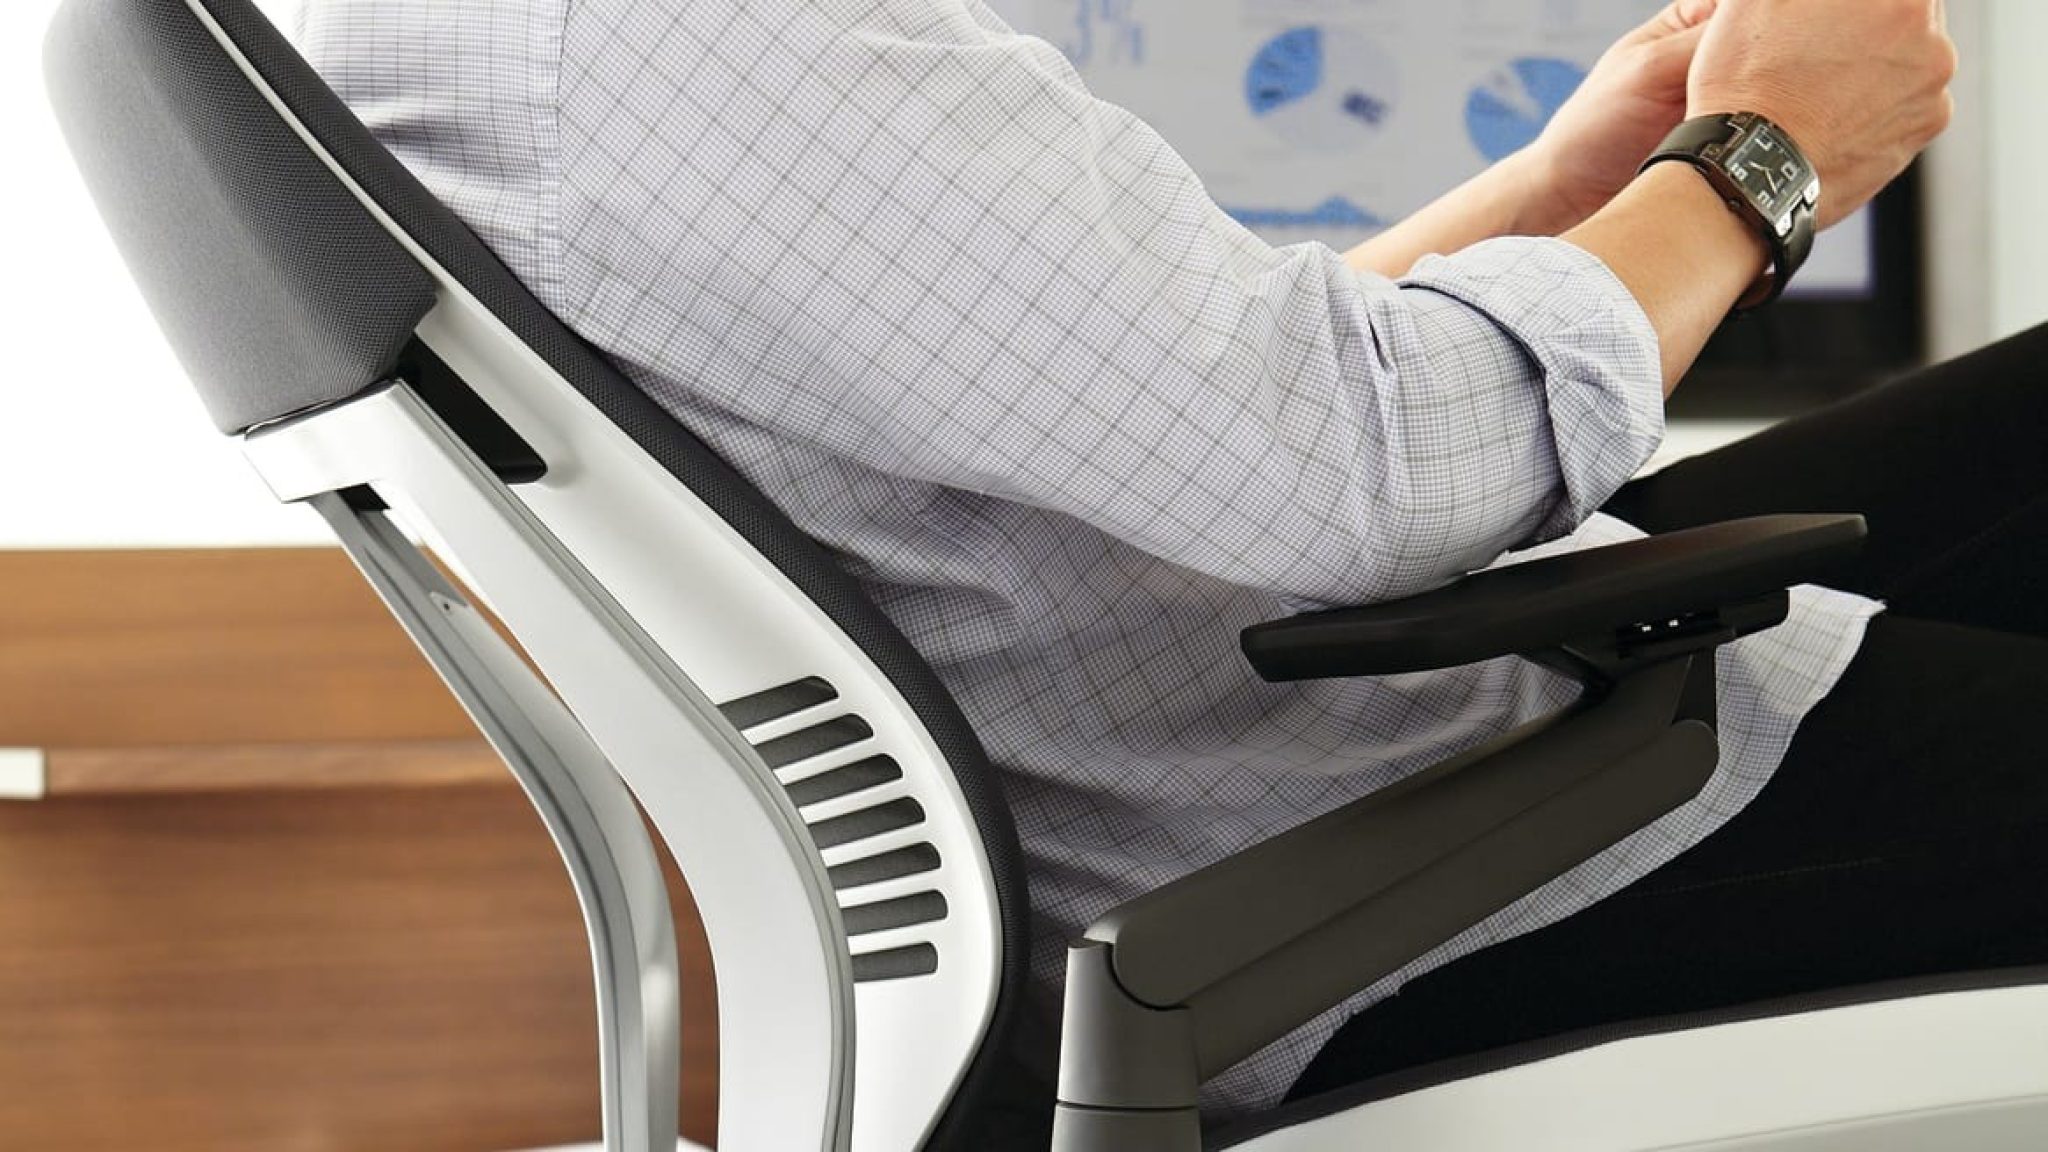 Best office chairs for back pain: How to choose the right model